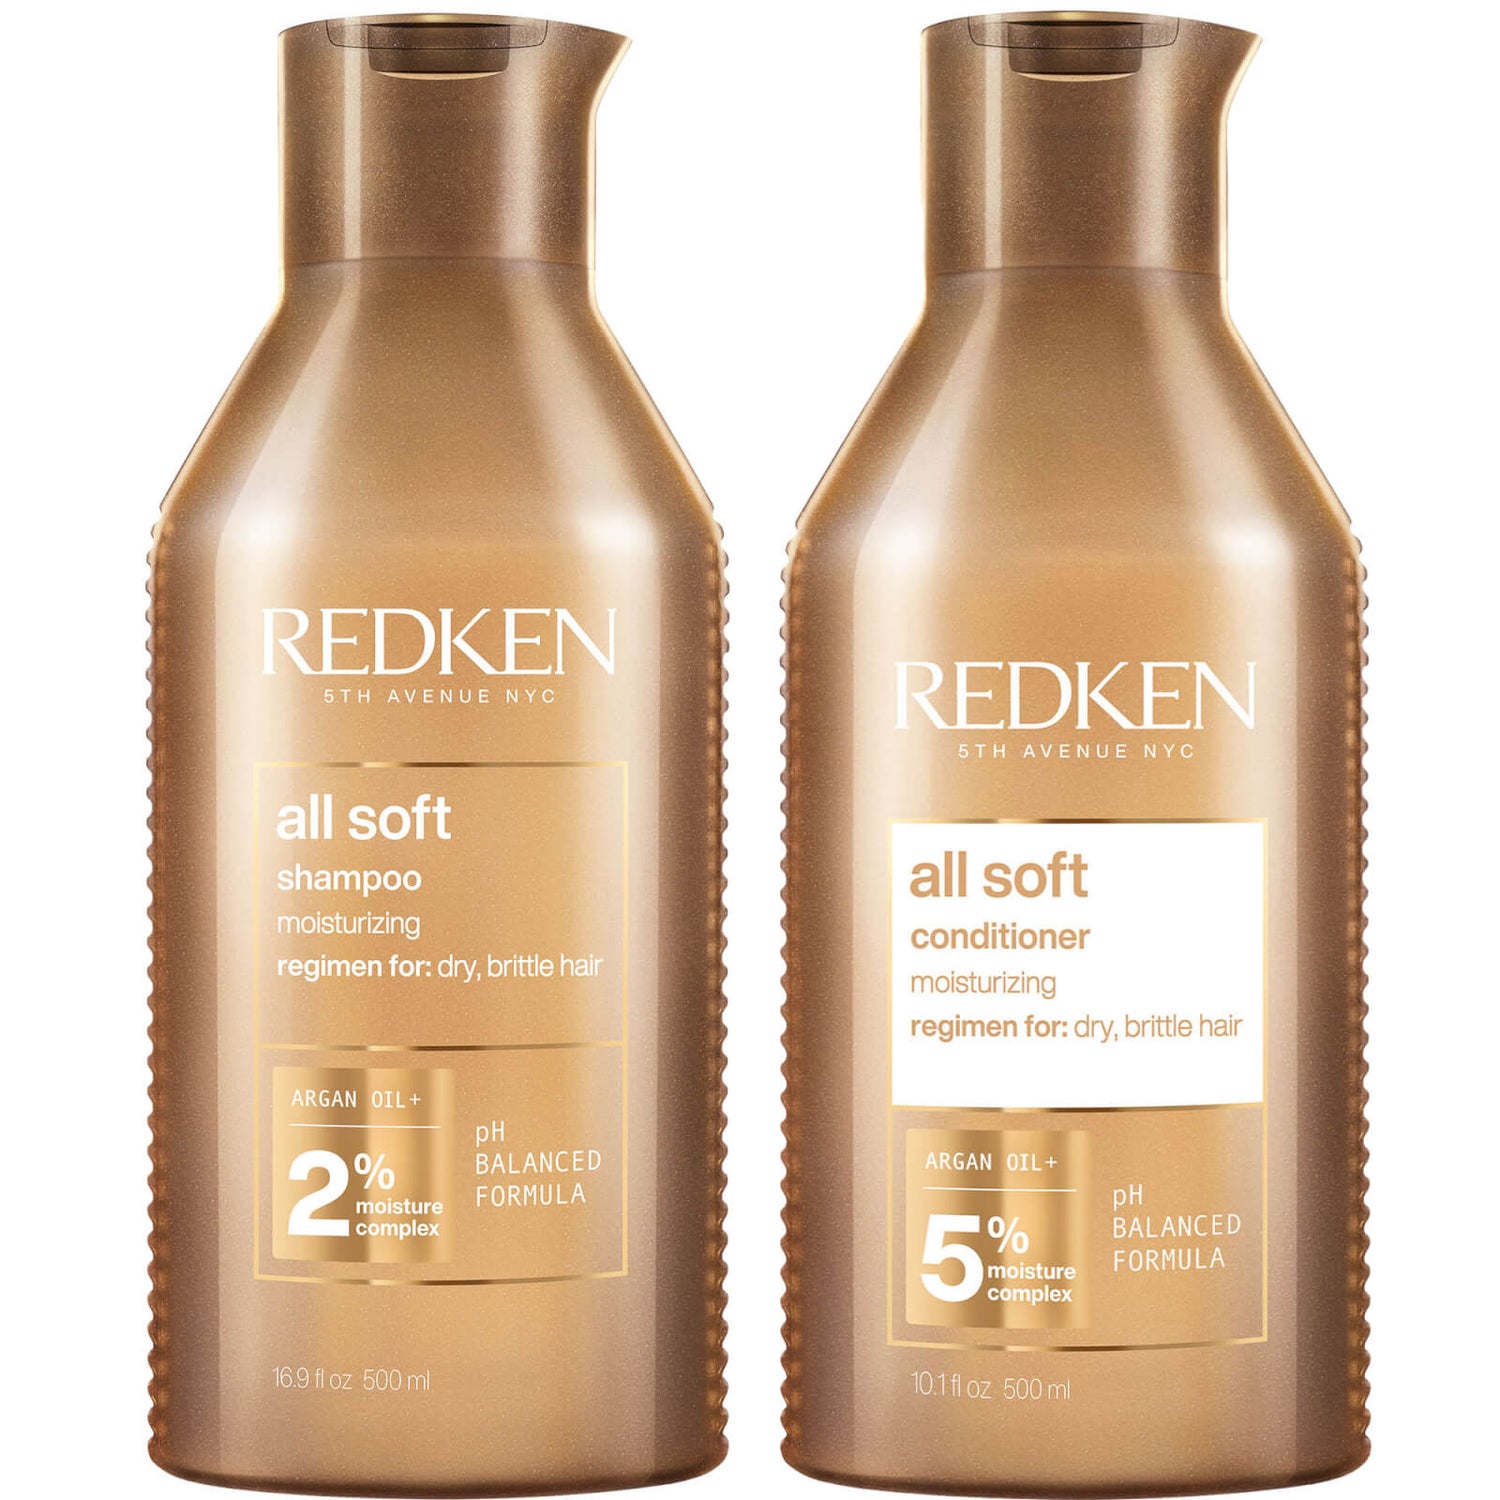 Redken All Soft Shampoo and Conditioner Routine For Dry, Brittle Hair 500ml